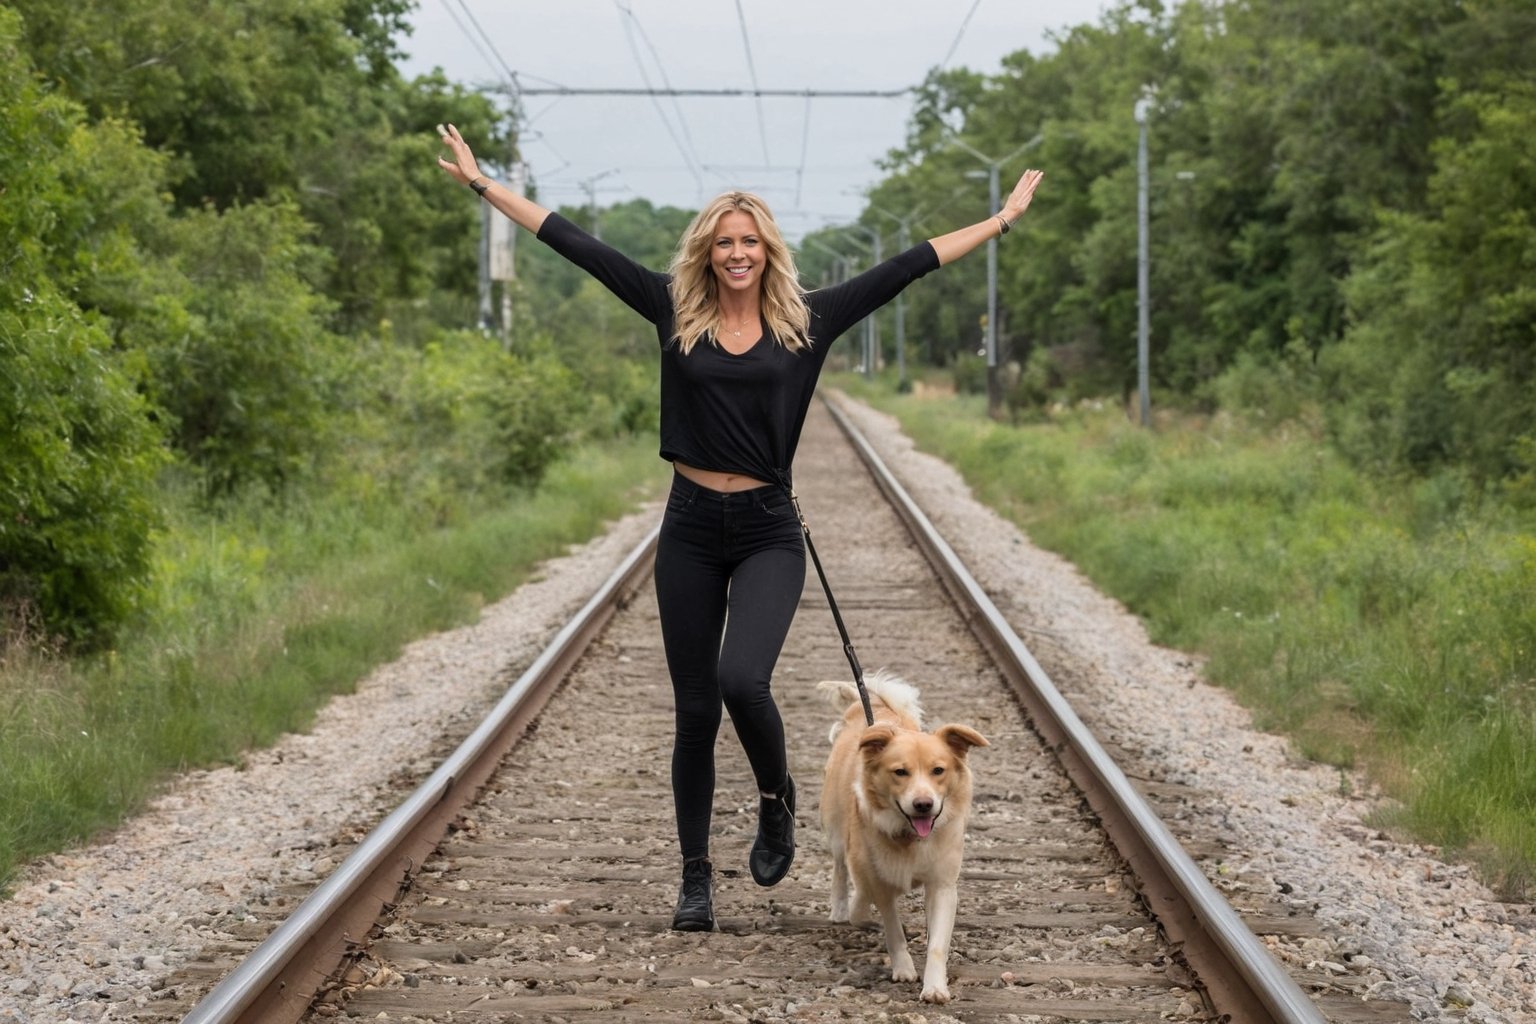 Photo of a blonde woman, arm stretched for balance, walking heel-to-toe on a single train rail. Her dog, a playful and energetic breed, trots along the rail beside her.